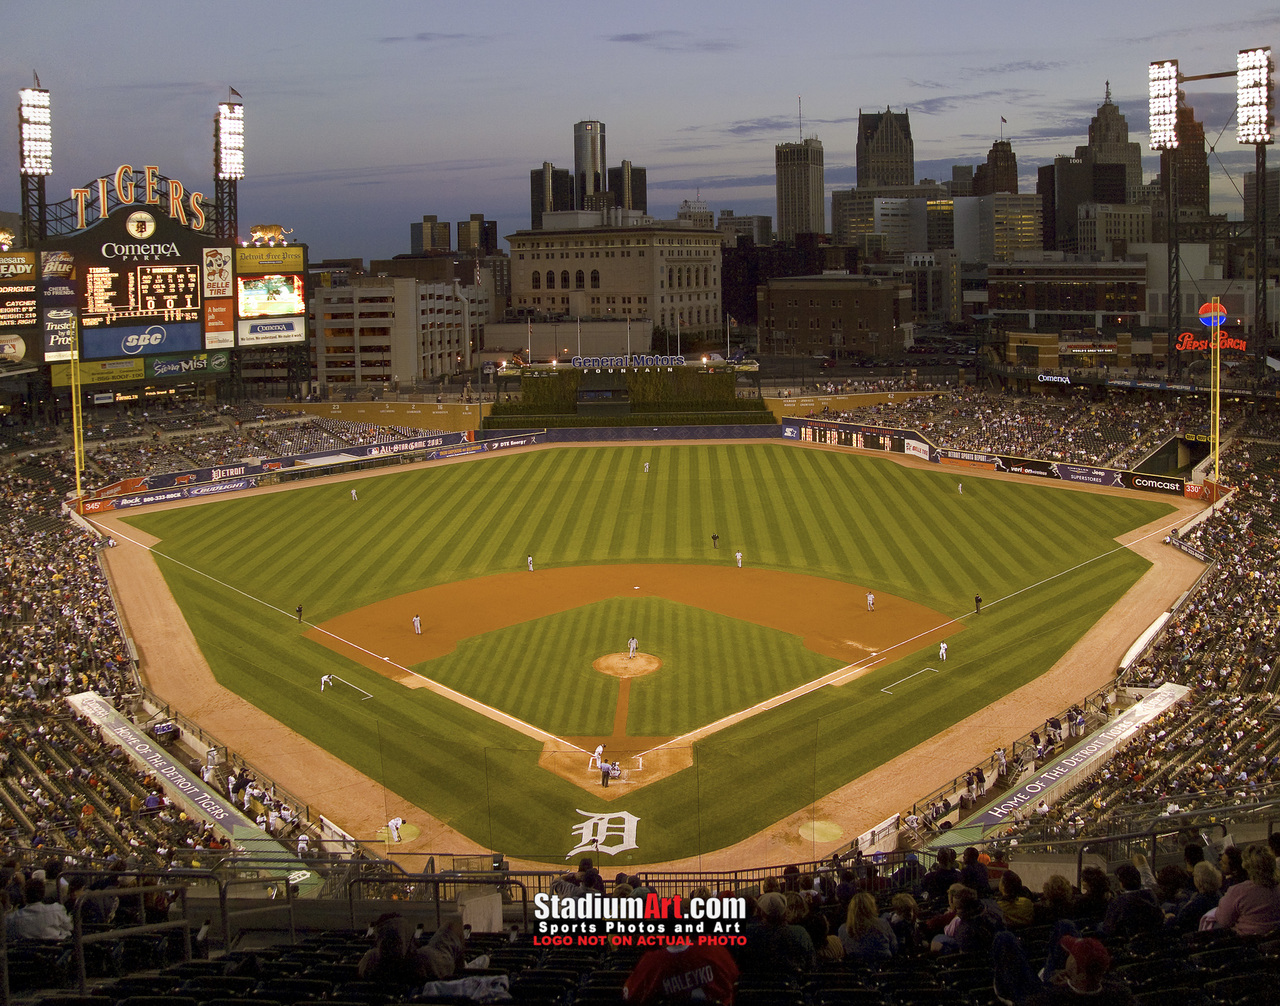 A tour of Detroit's baseball stadiums past and present